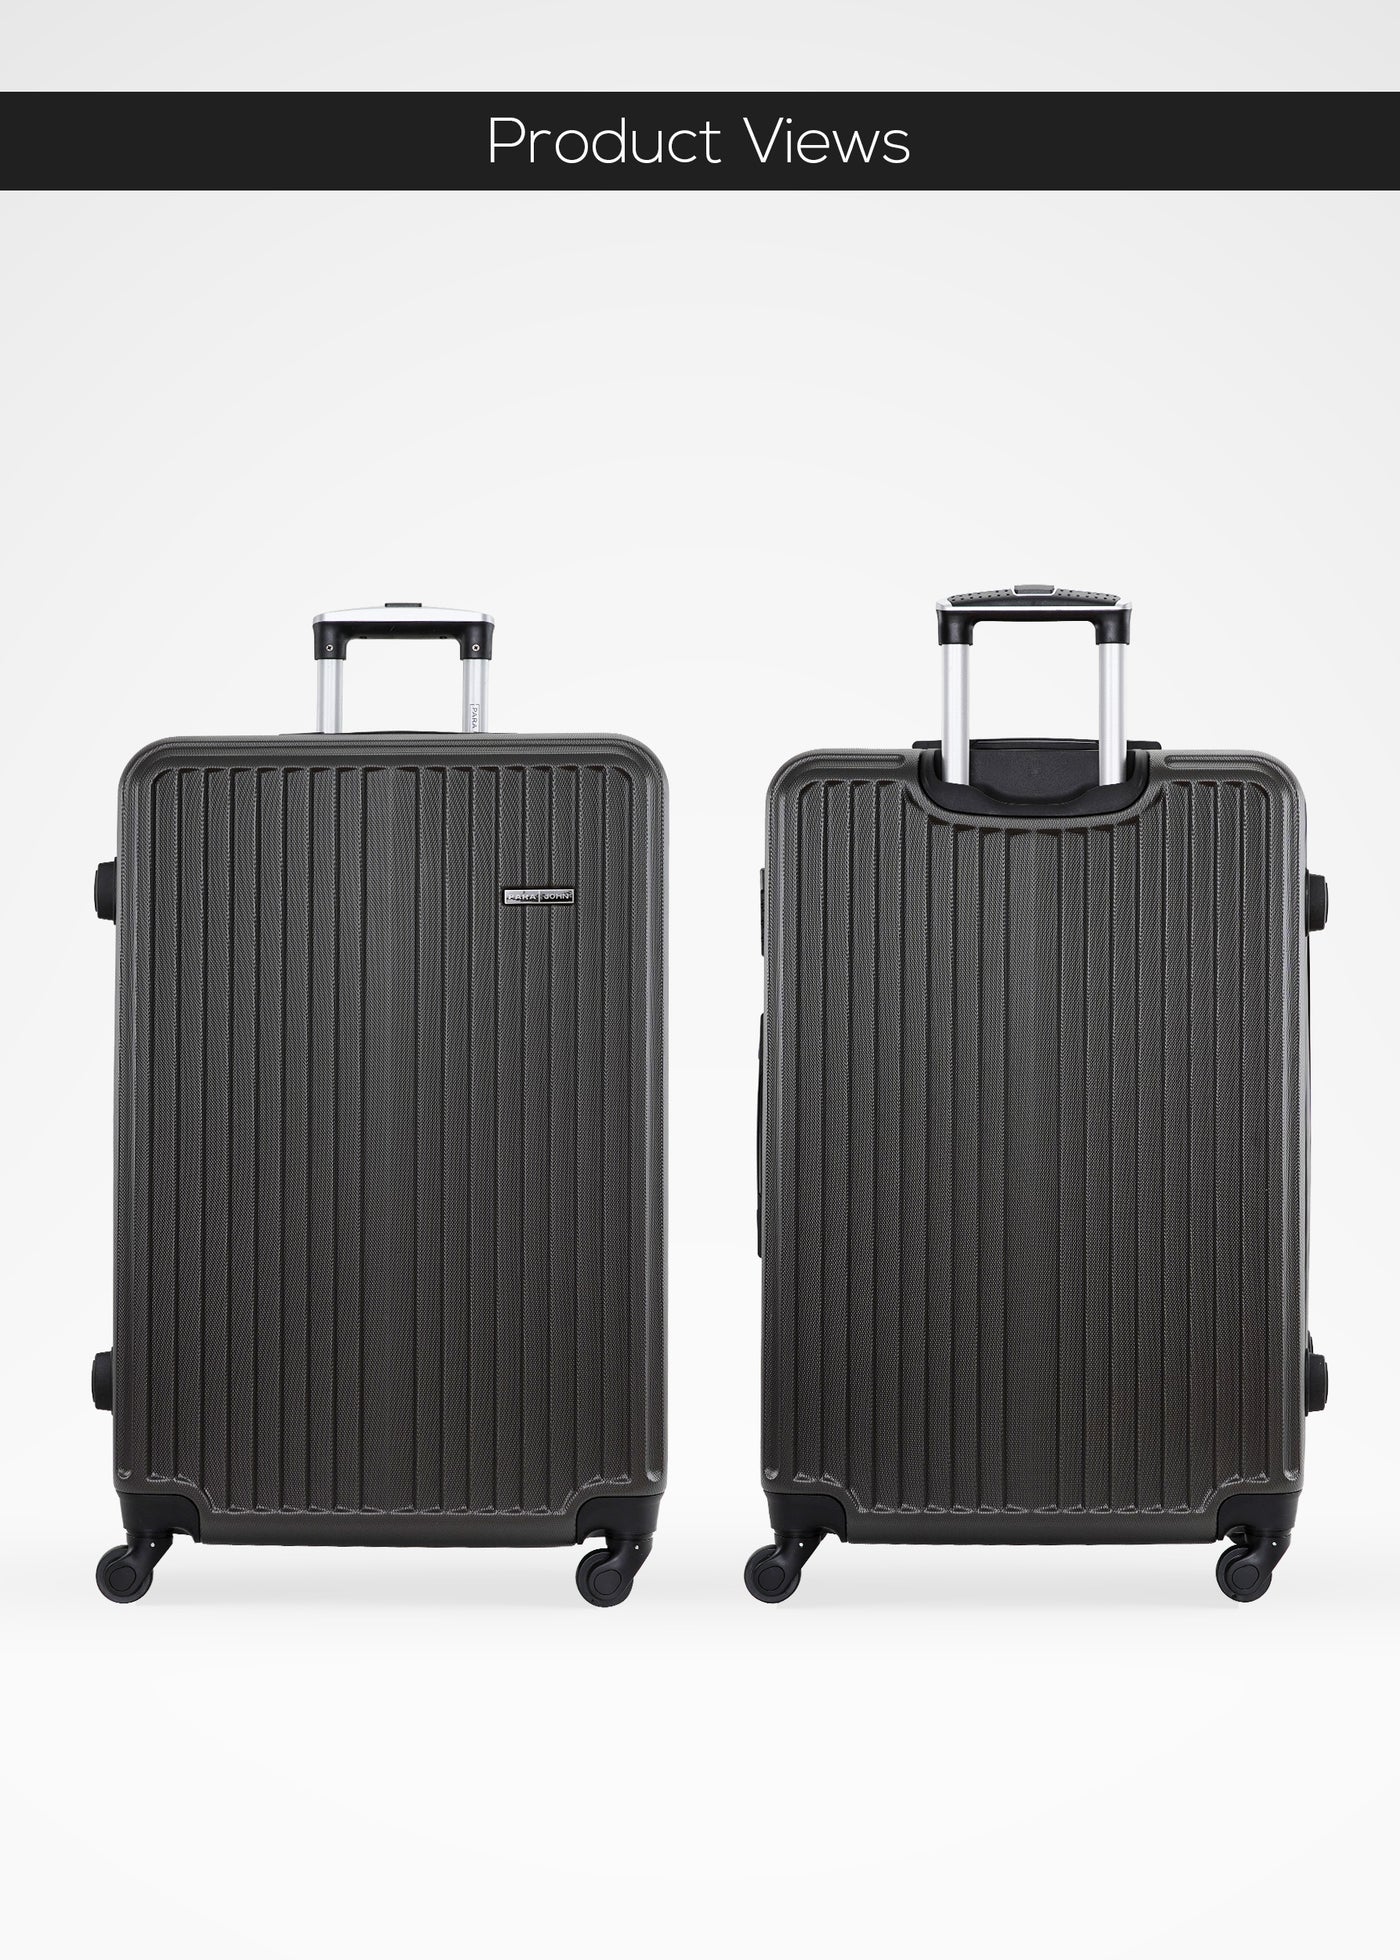 Alpha Cabin Size ABS Hardside Spinner Luggage Trolley 20 Inch